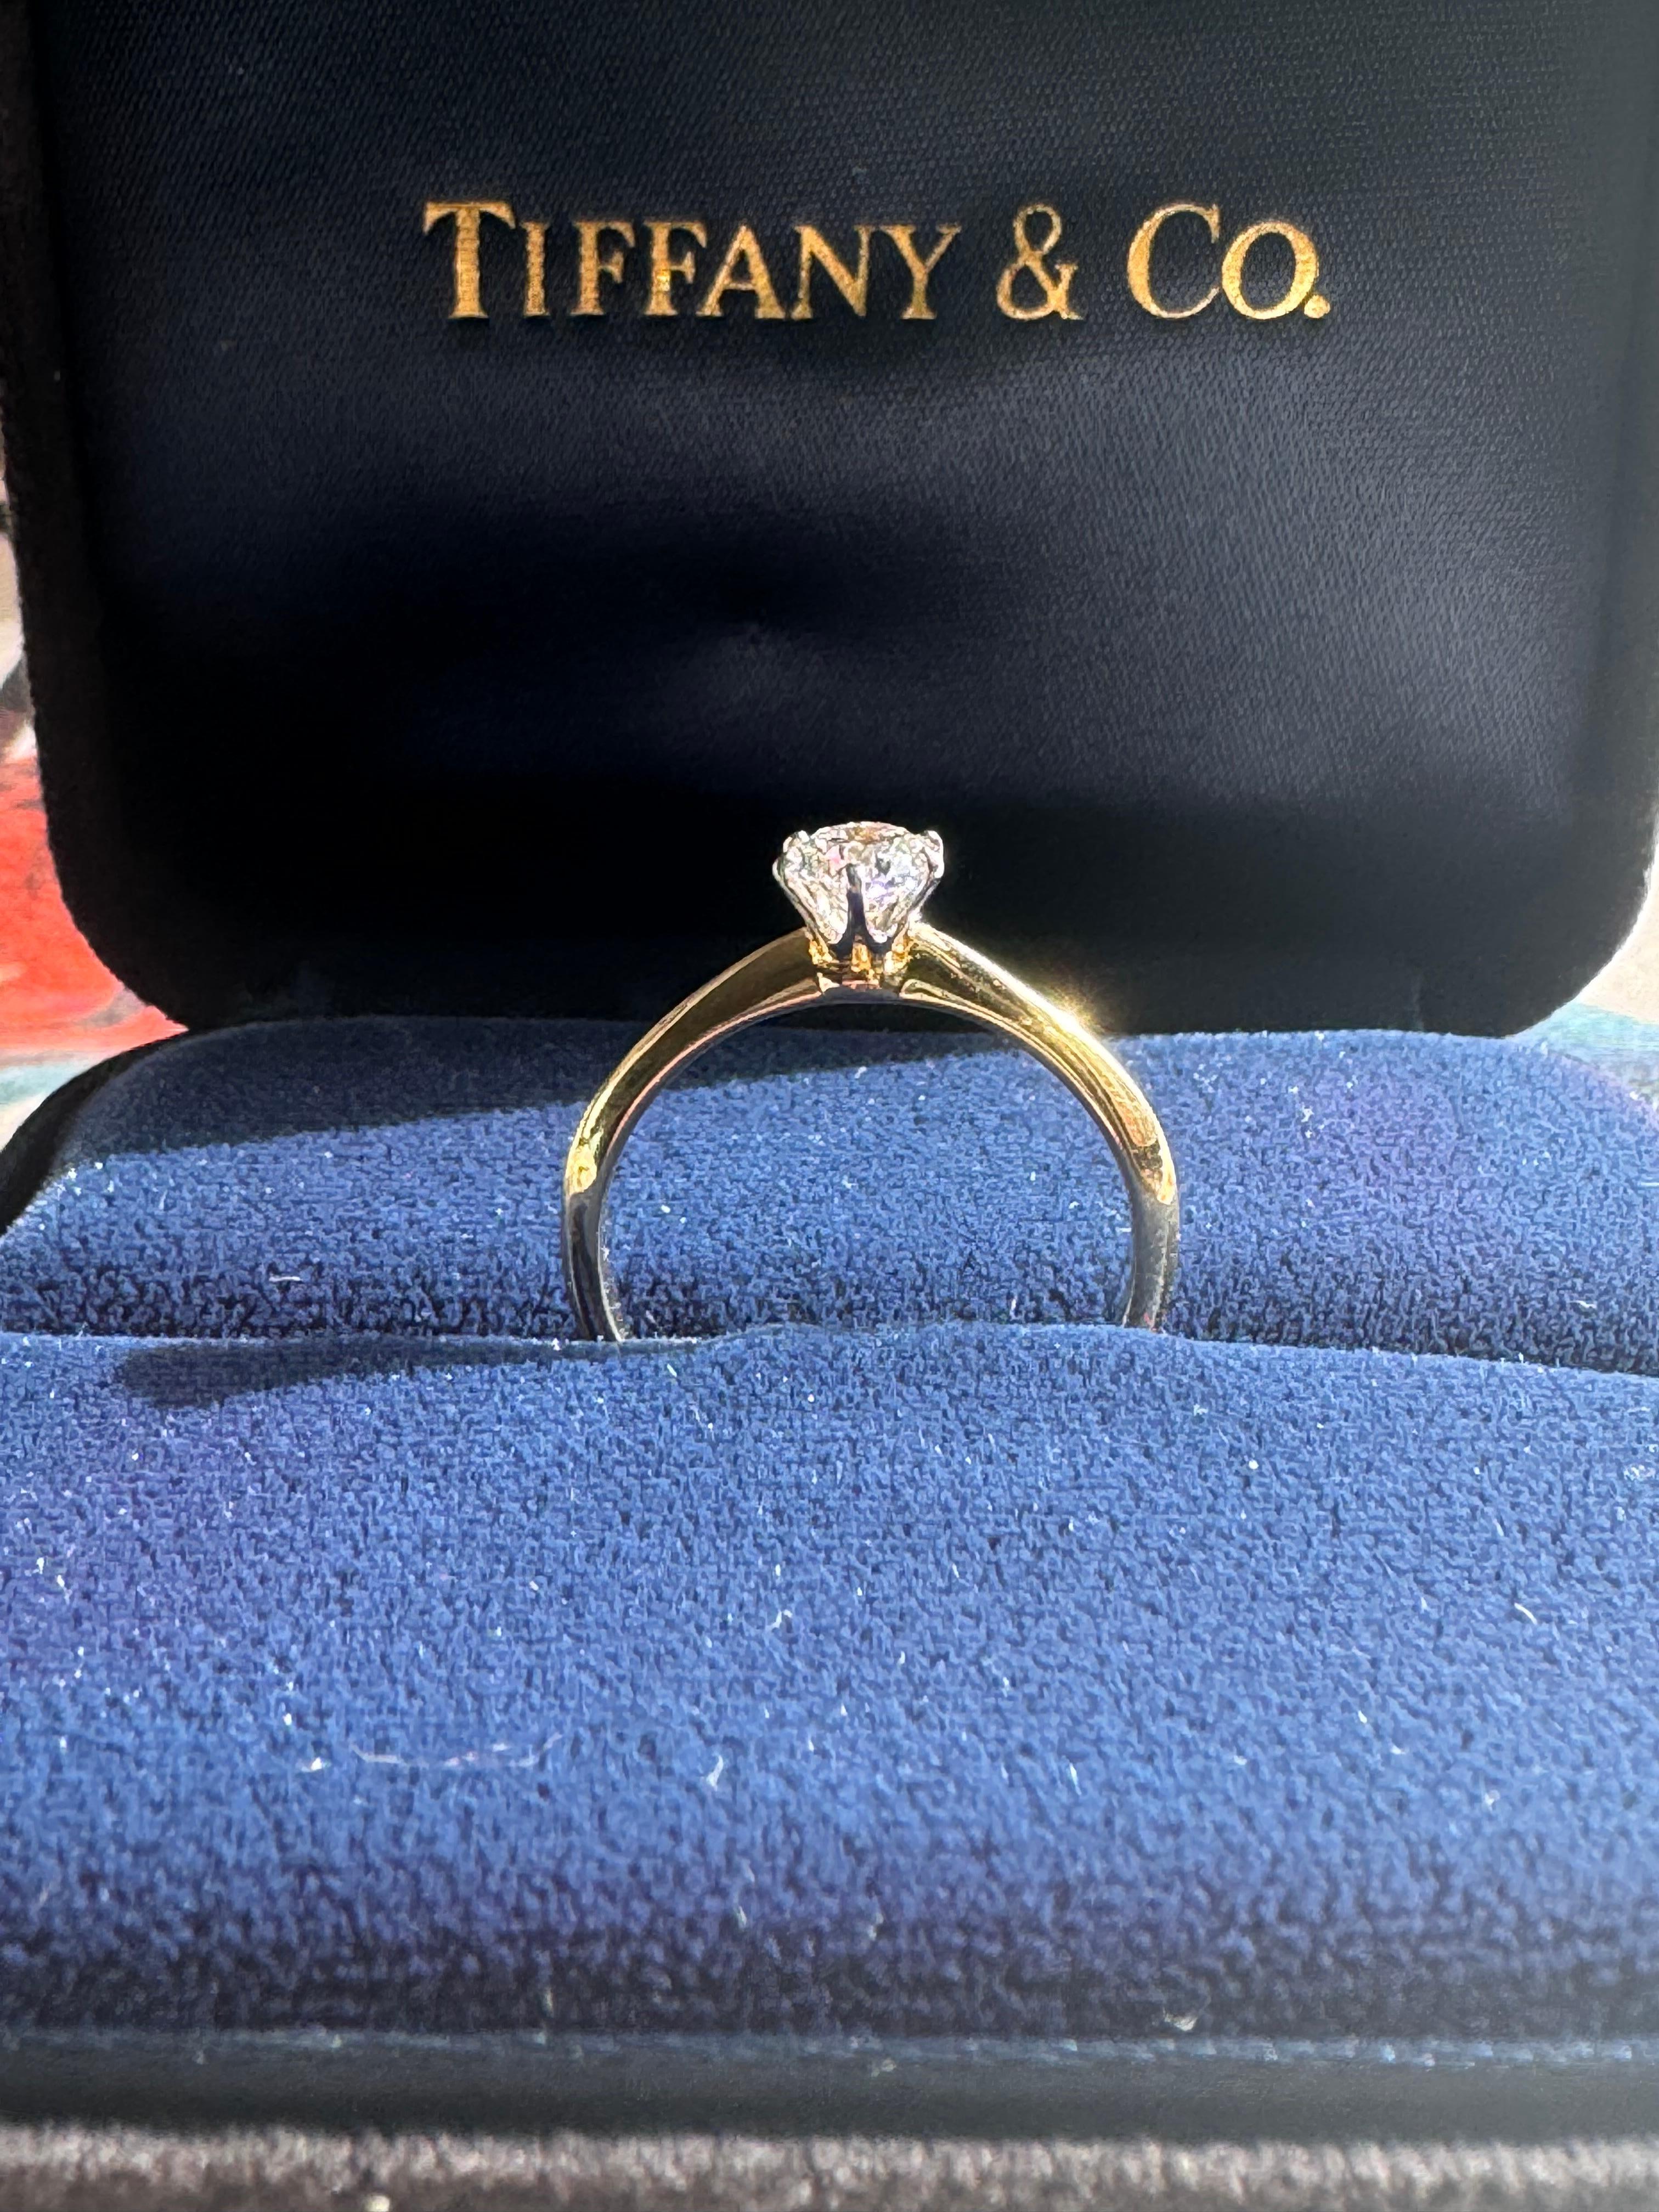 Tiffany & Co. Tiffany Setting Diamond Solitaire Ring.  Featuring a perfect round brilliant cut 0.47 carat diamond secured by 6 prongs set in 18K gold. 

Condition Description: 
In excellent condition, no scratches or marks, comes with the original